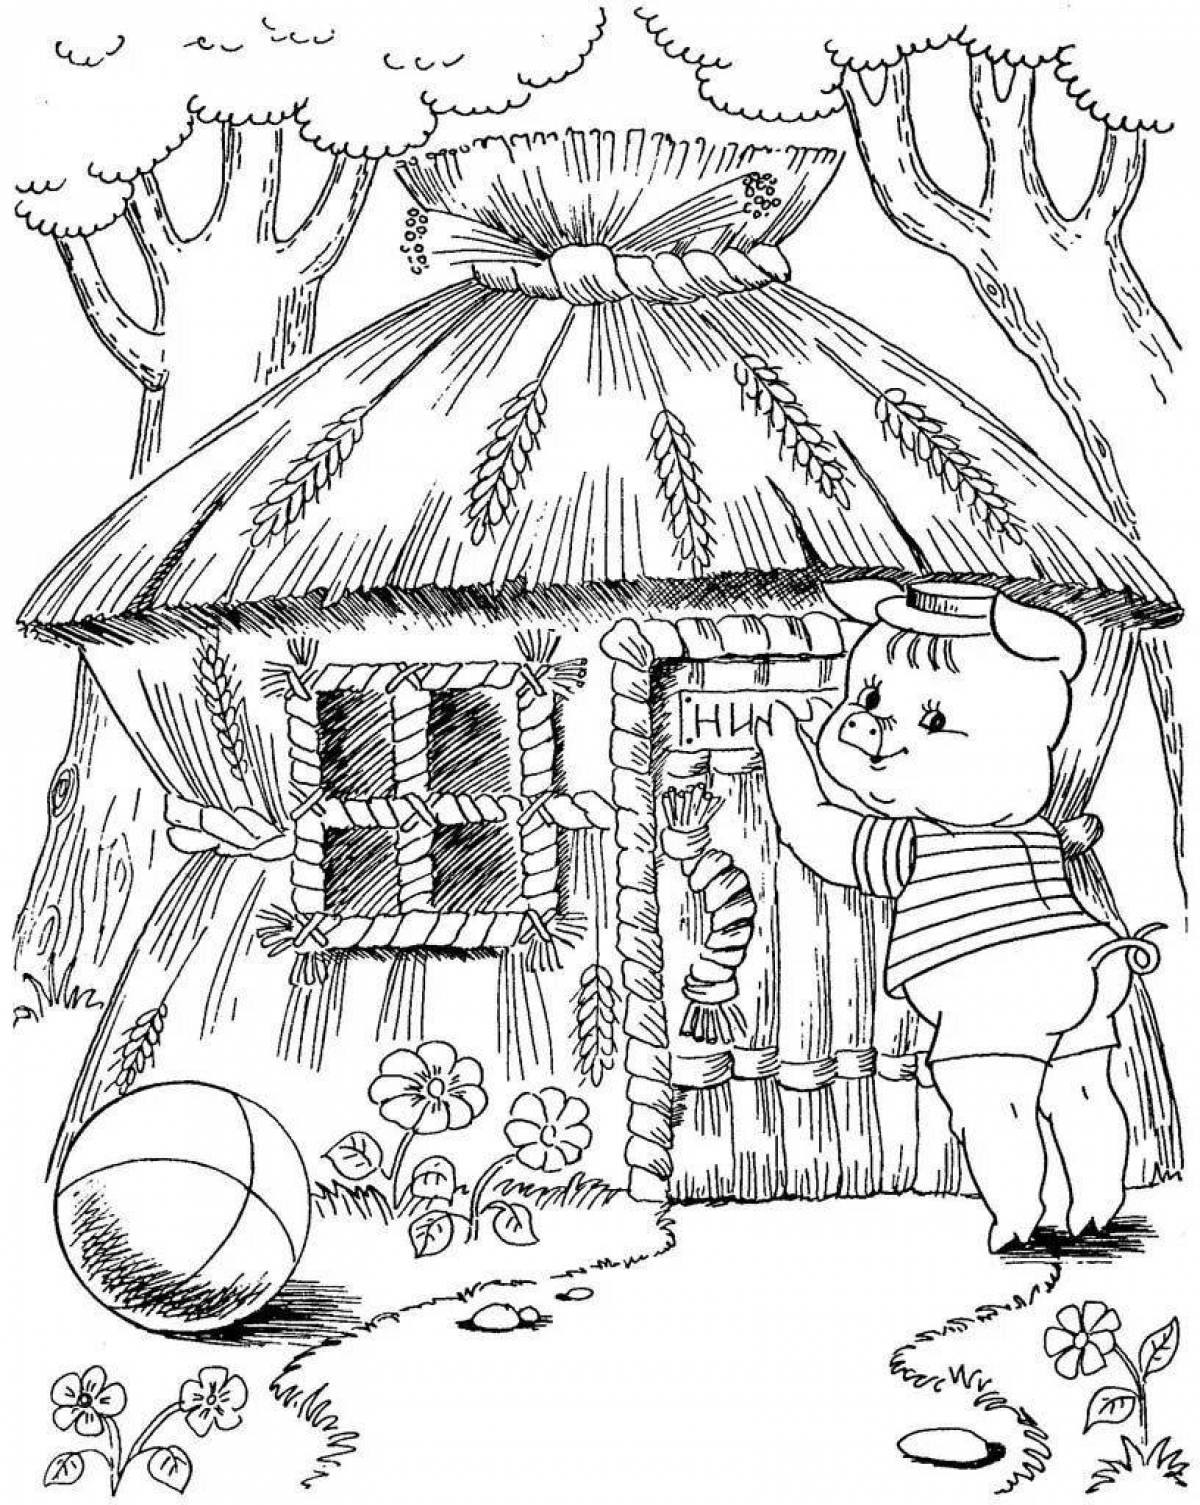 Funny three little pigs with houses